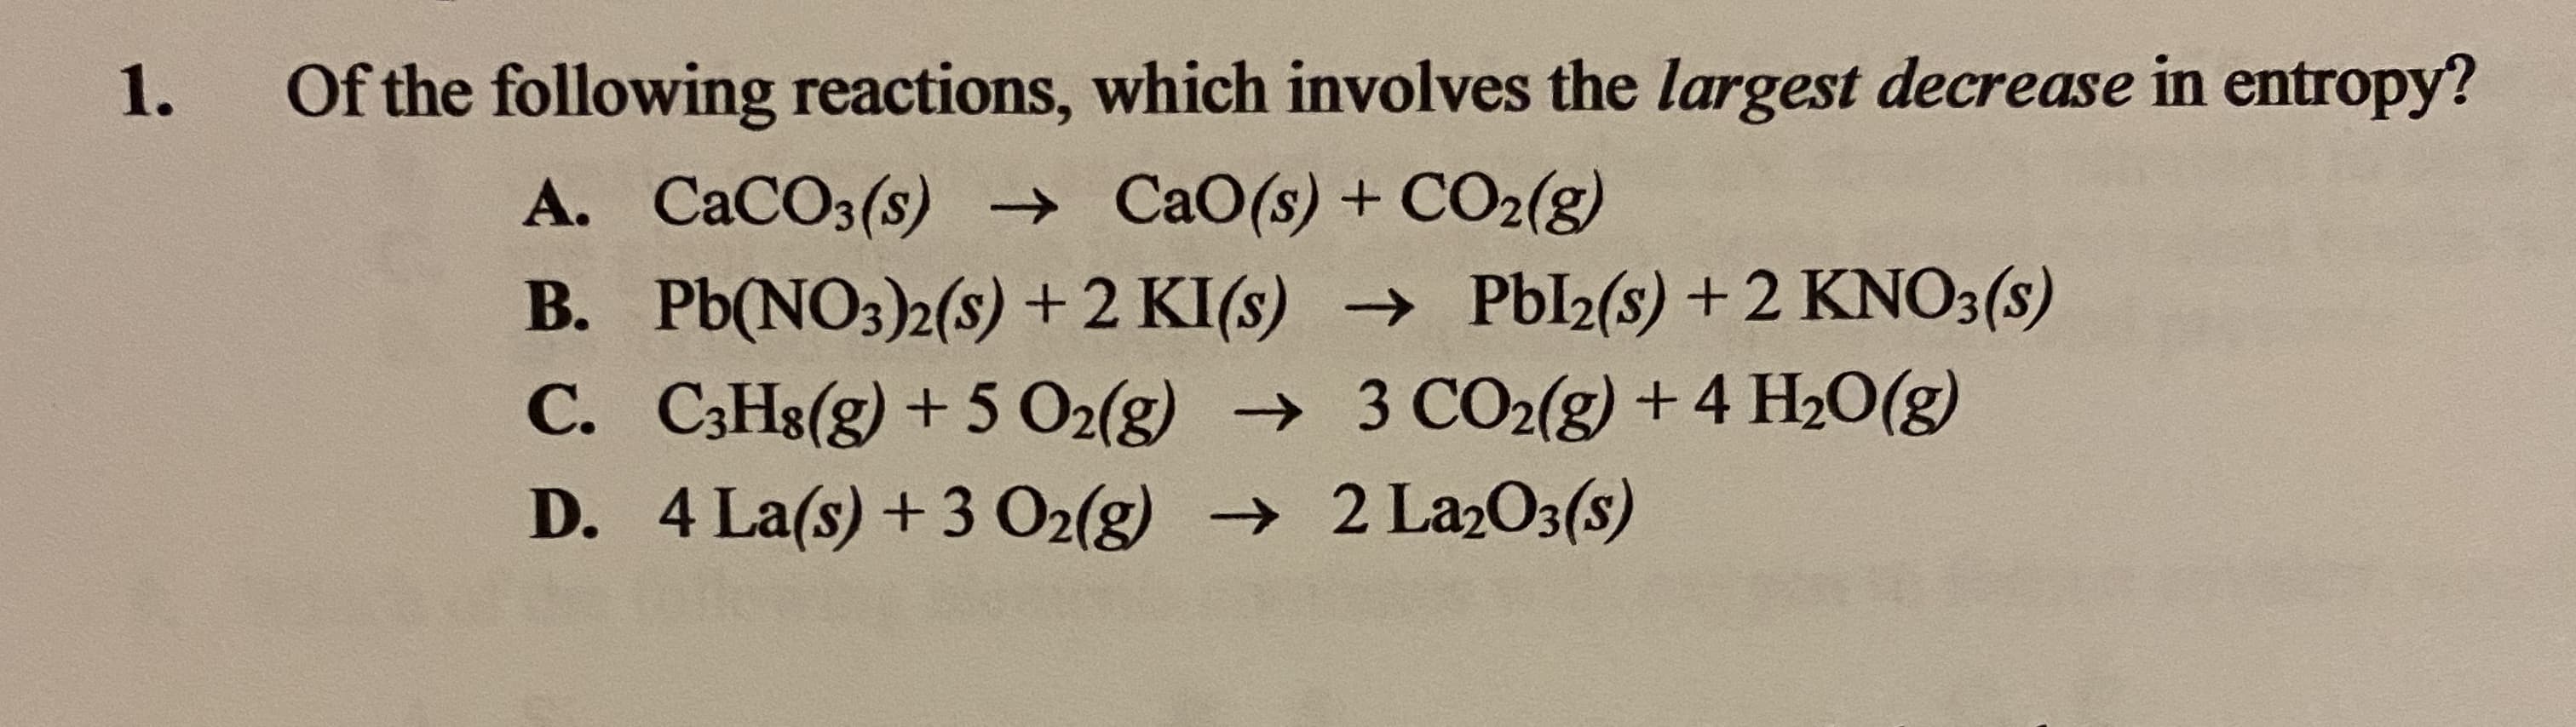 Of the following reactions, which involves the largest decrease in entropy?
A. CaCO3(s) → CaO(s) + CO2(g)
B. Pb(NO3)2(s) + 2 KI(s) → Pbl2(s) + 2 KNO3(s)
C. C3H8(g) + 5 O2(g) → 3 CO2(g) +4 H20(g)
D. 4 La(s) +3 O2(g) → 2 La2O3(s)
